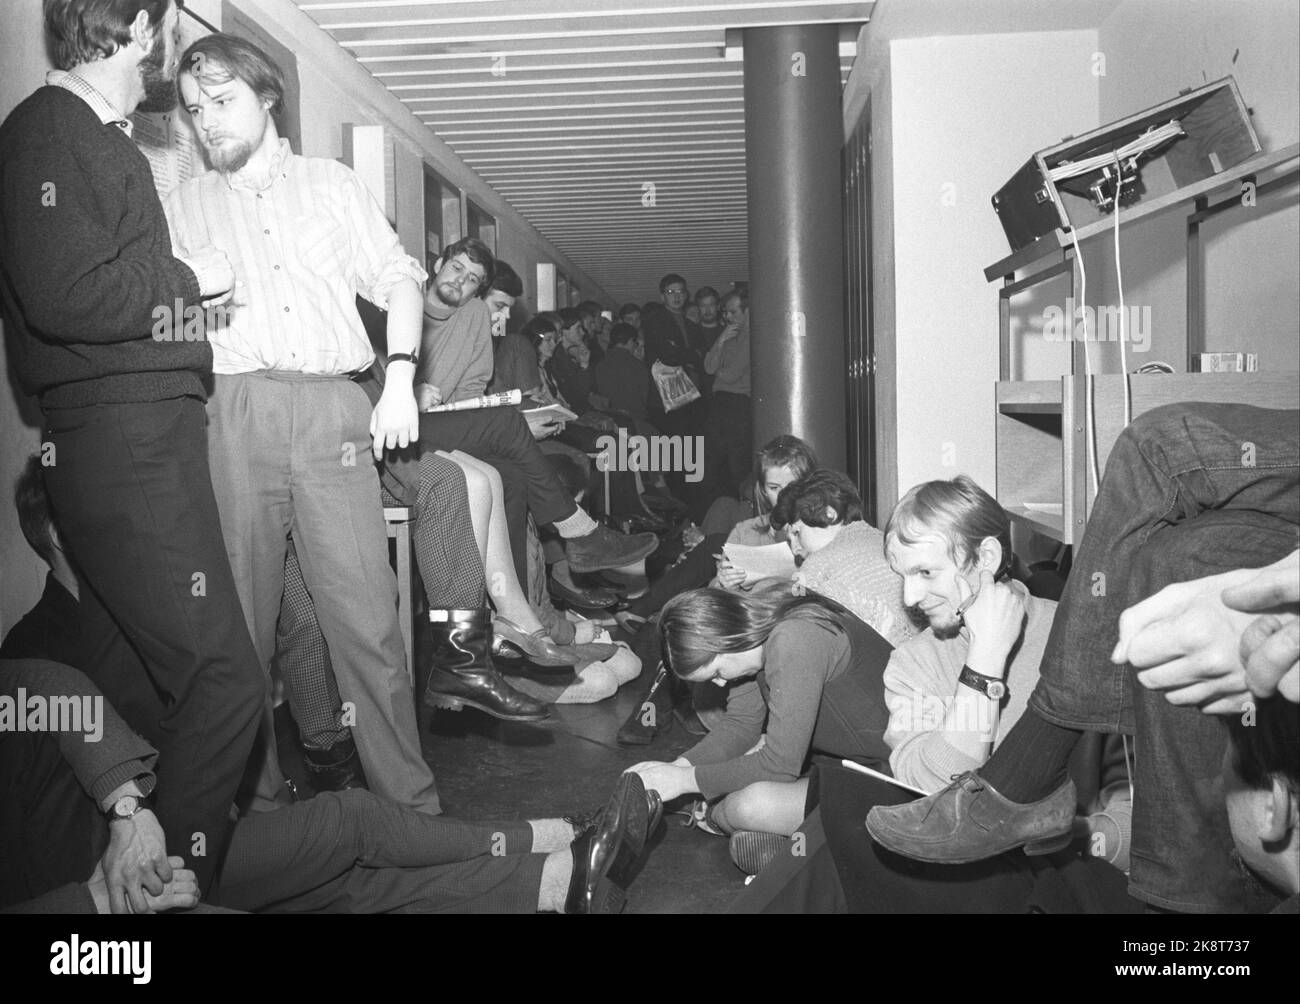 Oslo February 1, 1969. The philosophy students at Blindern in Oslo in full rebellion. Here students in the hallway listen to appeals via speakers, as everyone did not fit inside the hall. Photo: Ivar Aaserud / Current / NTB Stock Photo